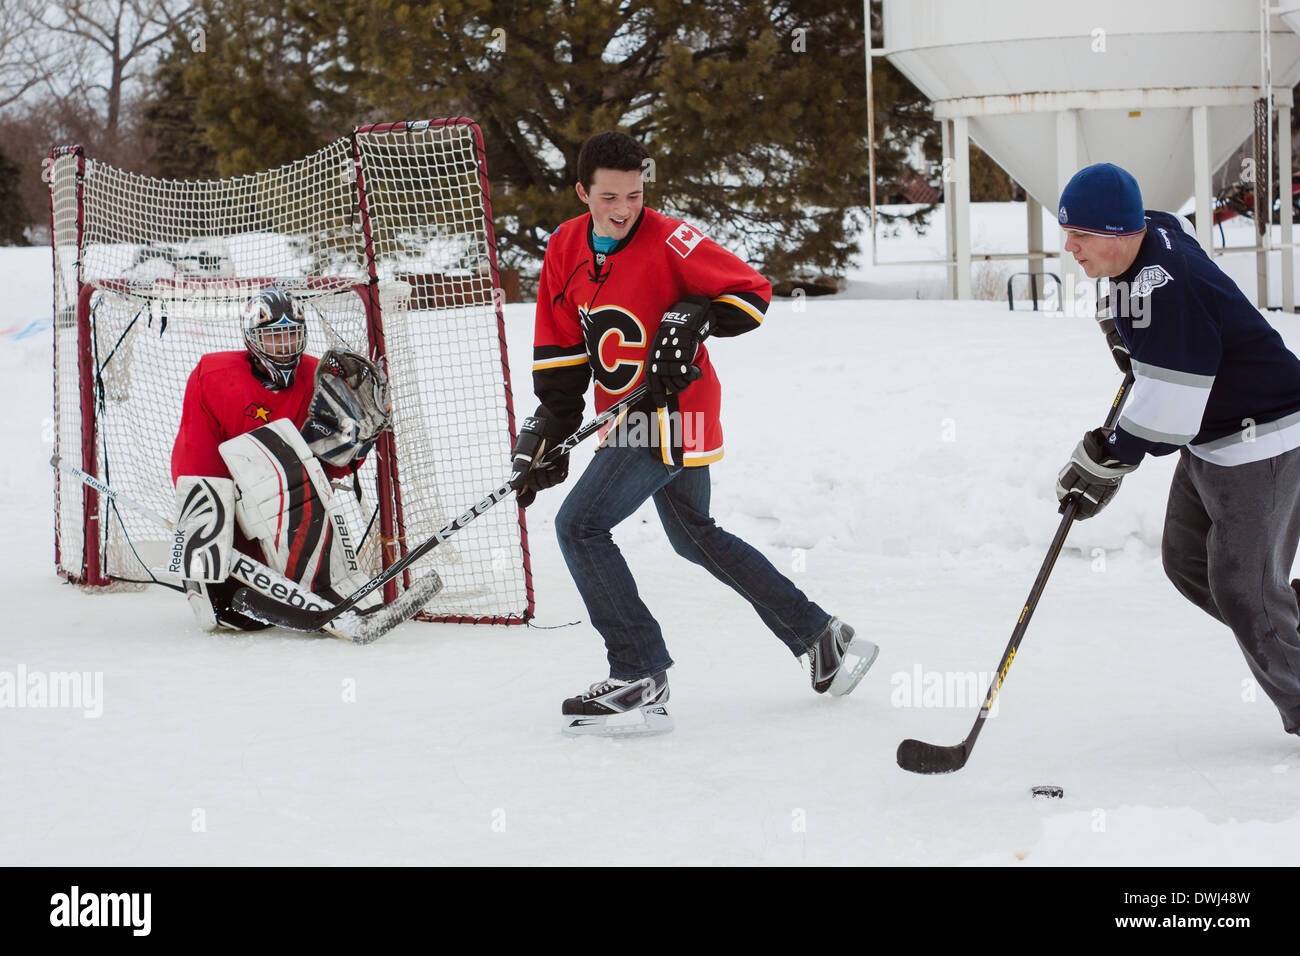 Outdoor Ice Hockey with friends. A friendly recreational game of hockey